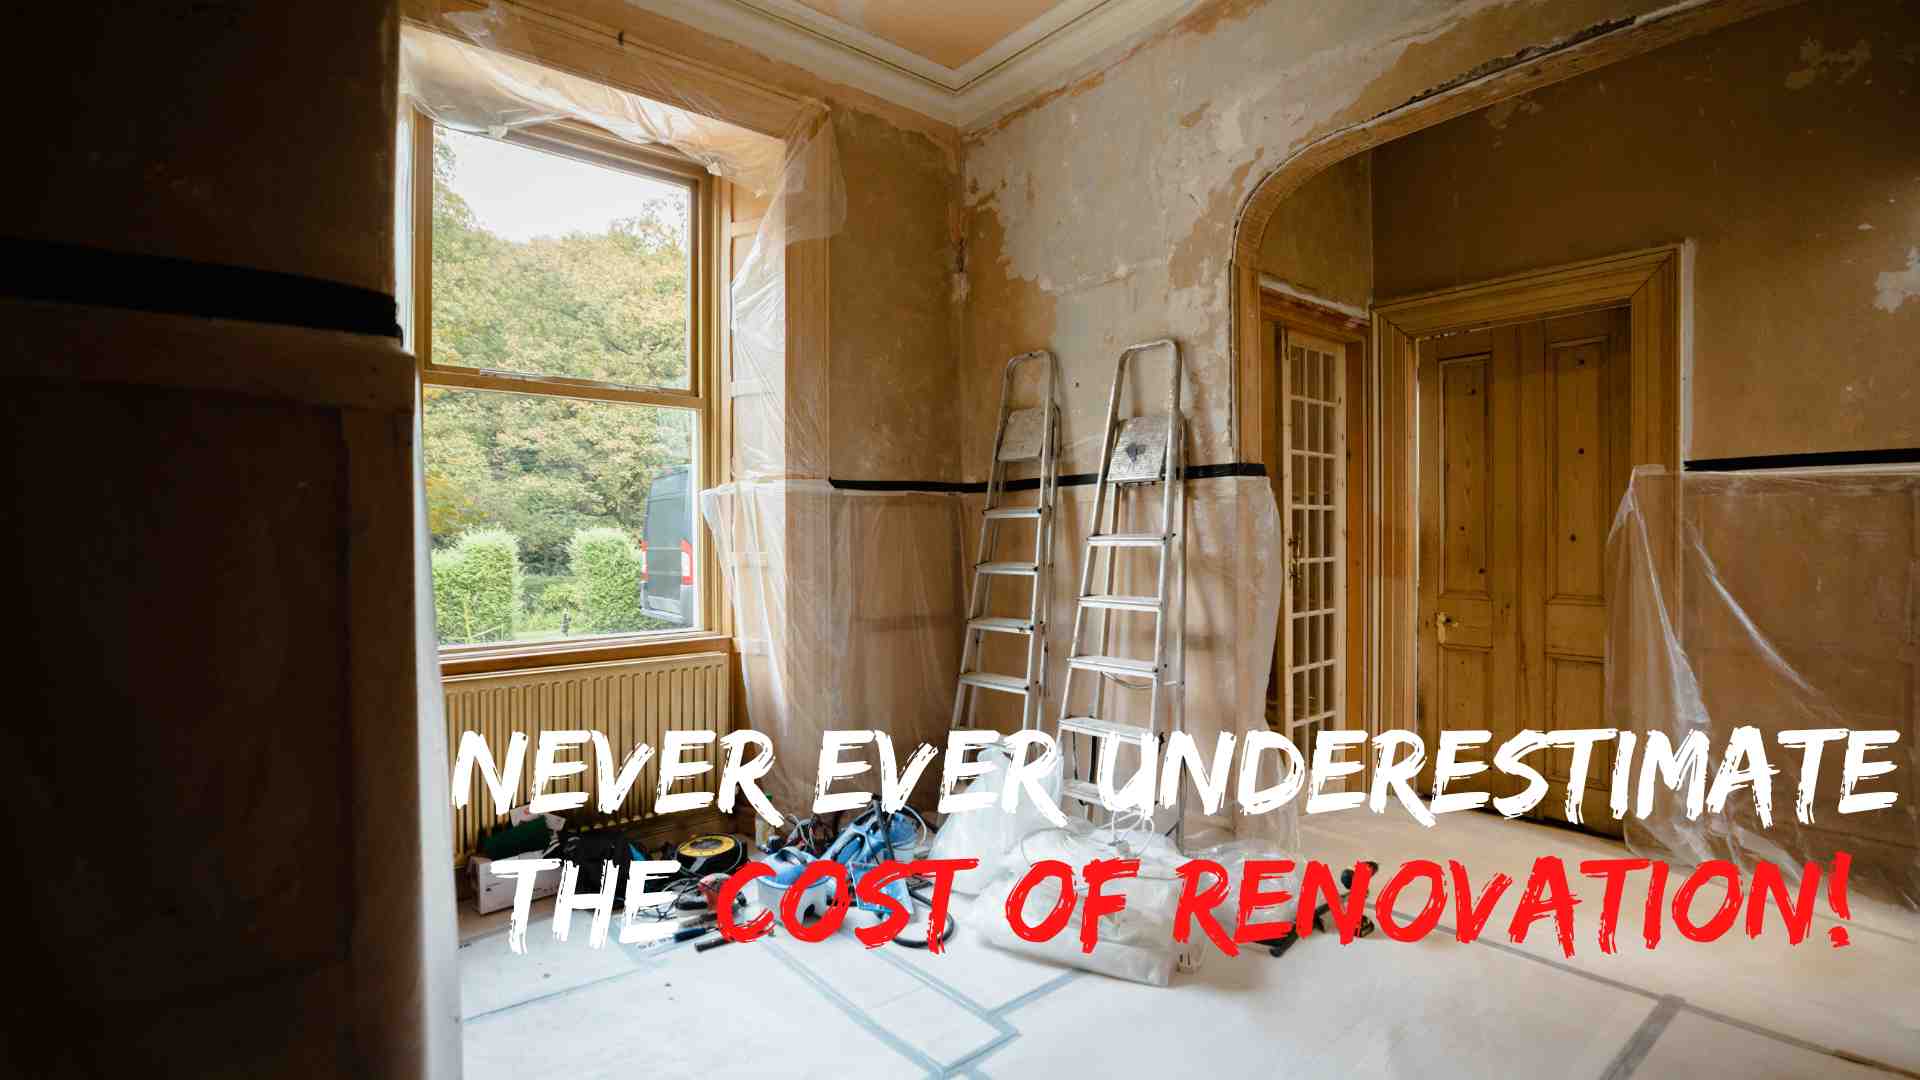 Never ever underestimate the cost of renovation!